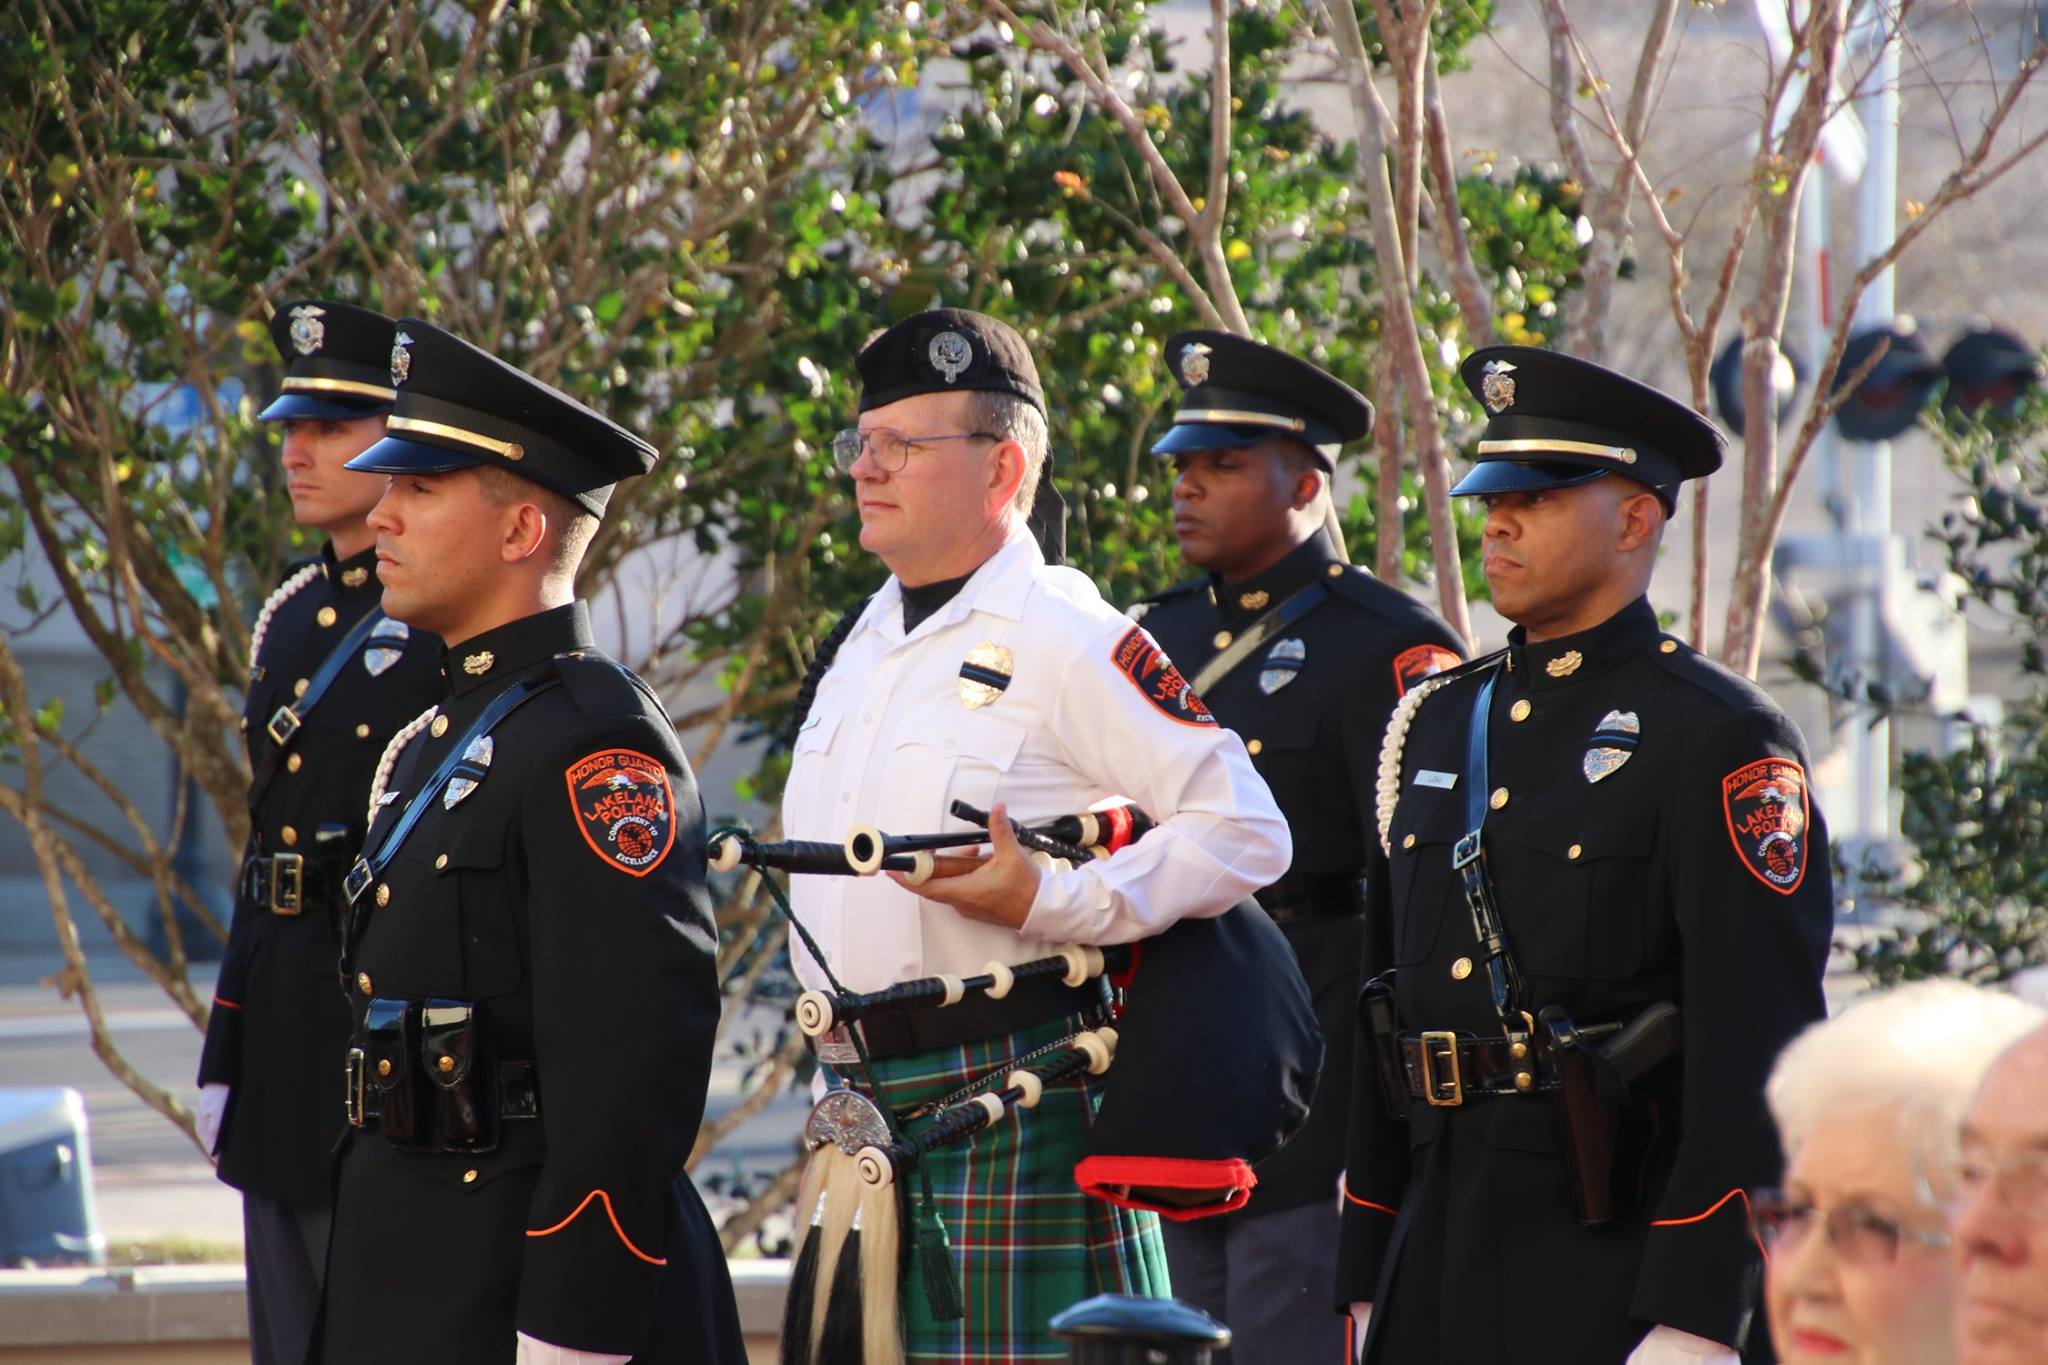 A picture of the honor guard